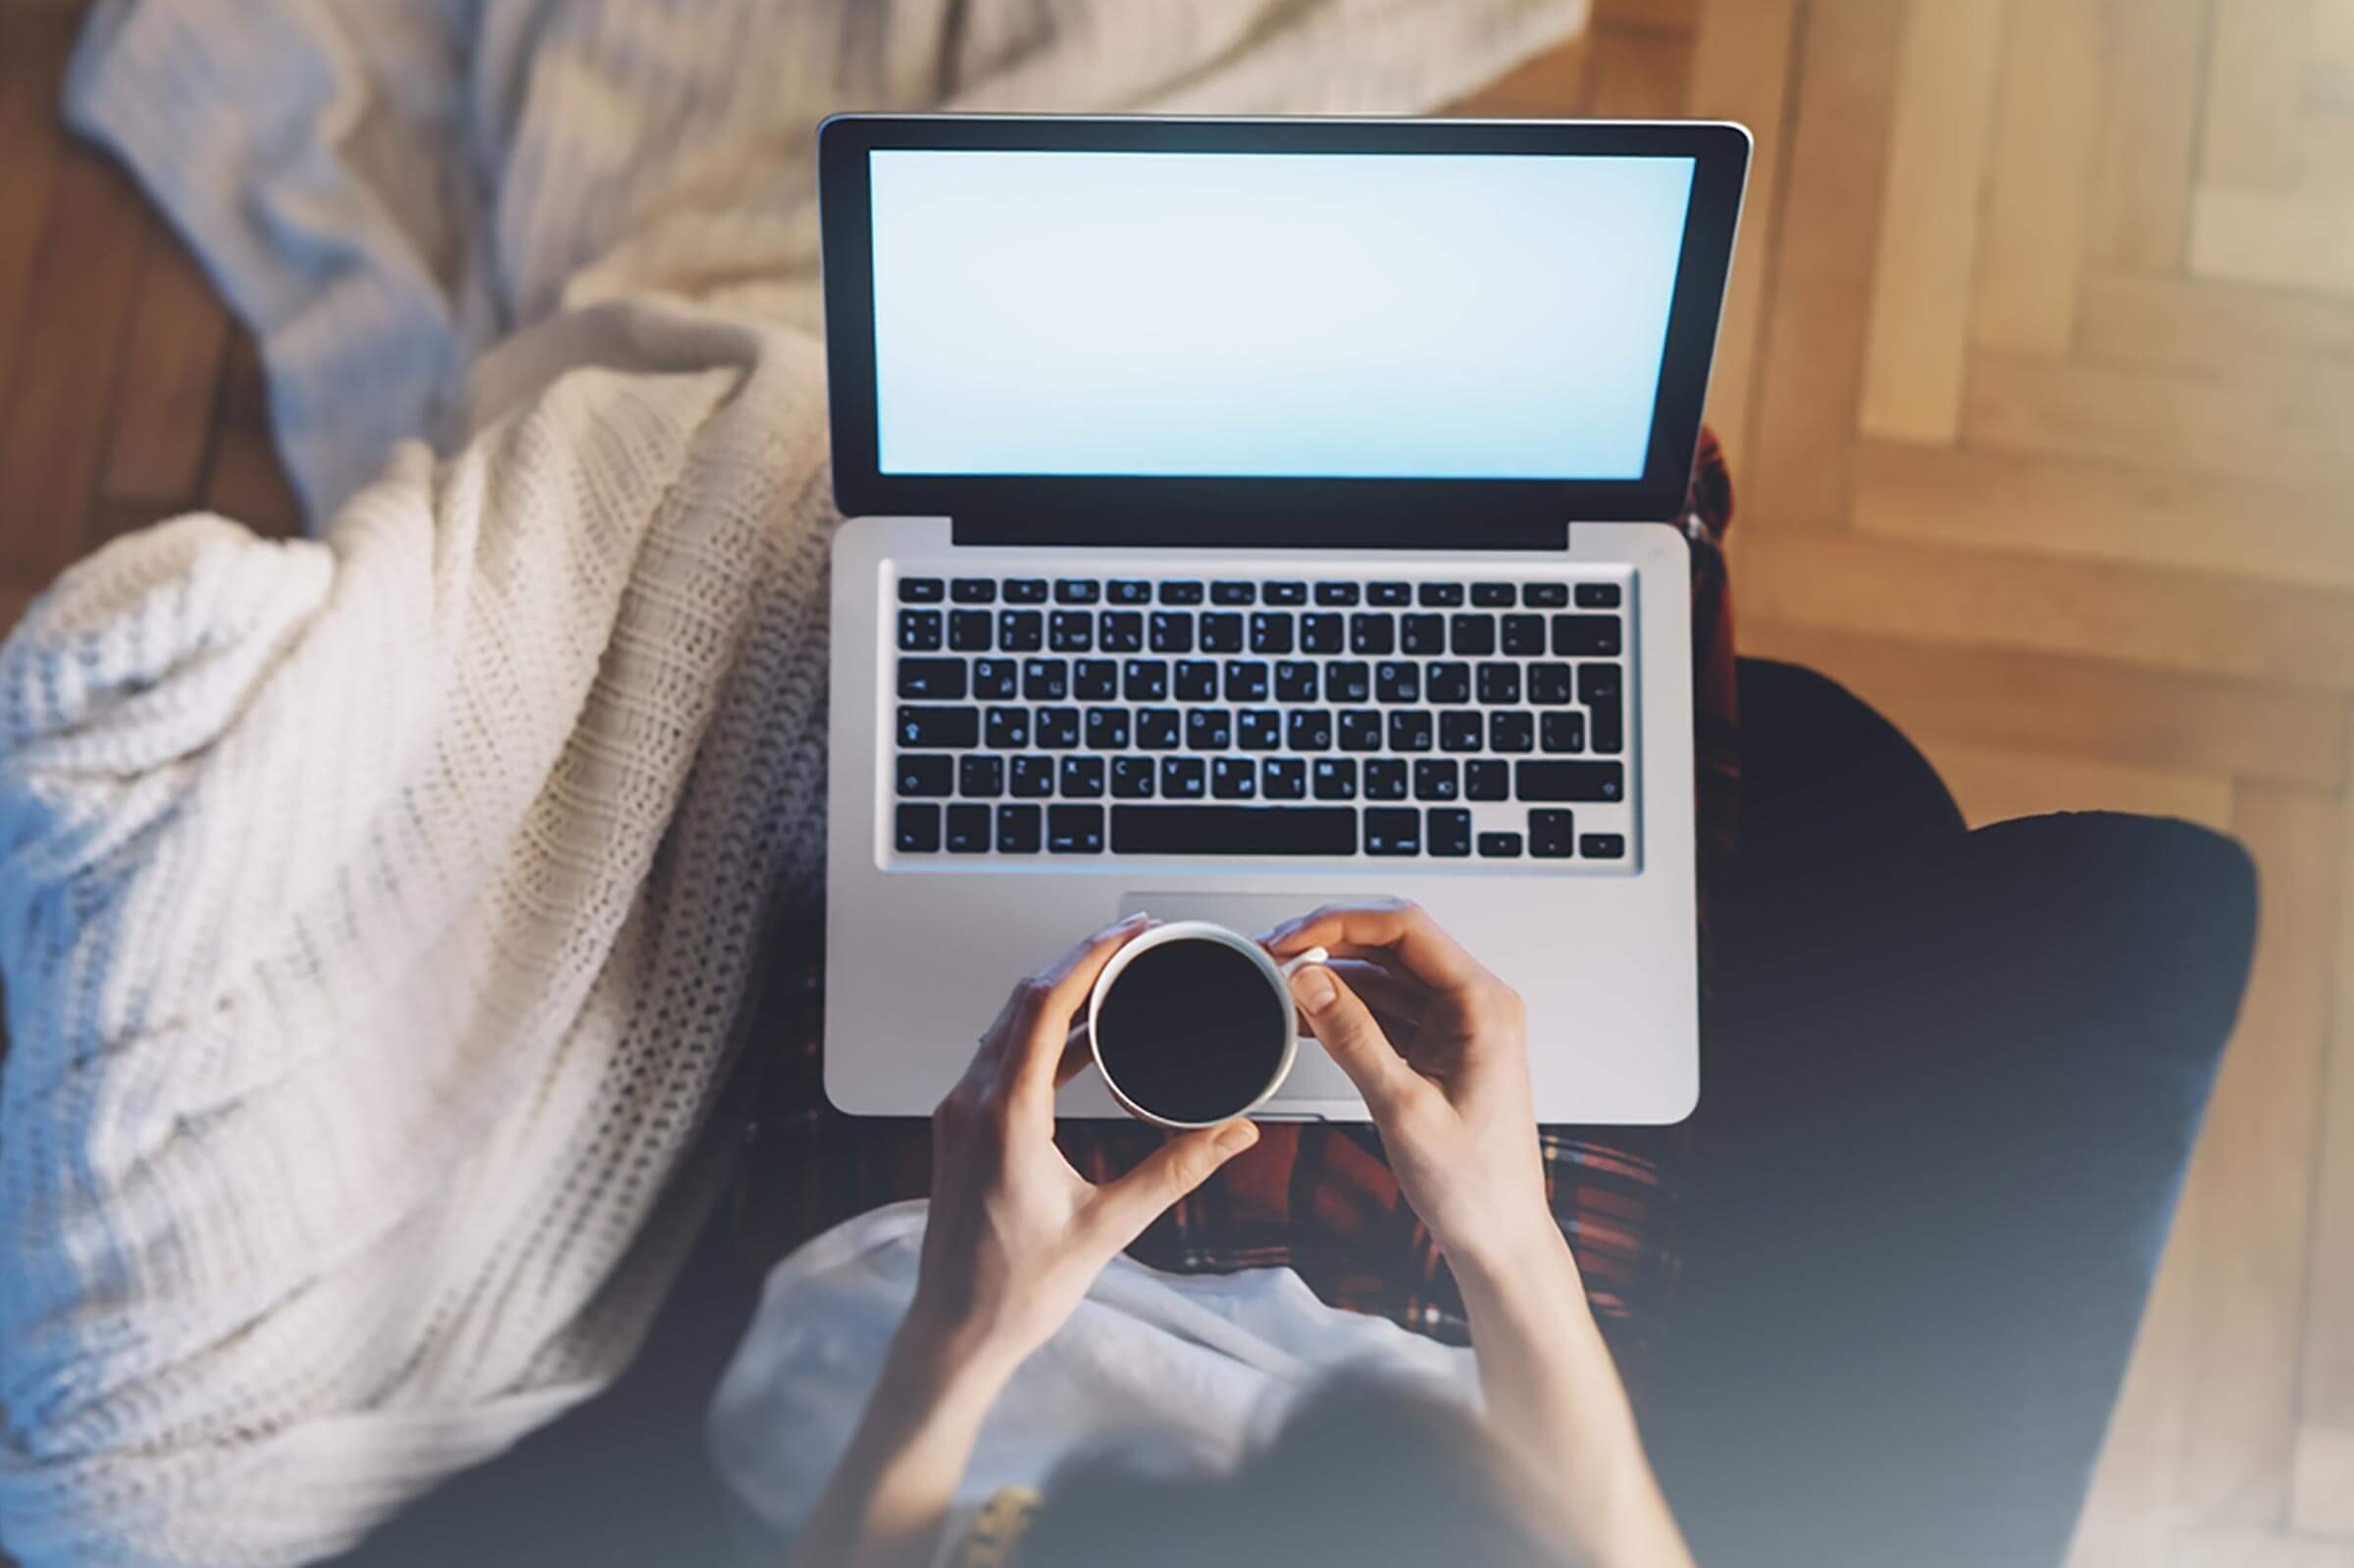 A person with their laptop computer in their lap while also holding a cup of coffee.